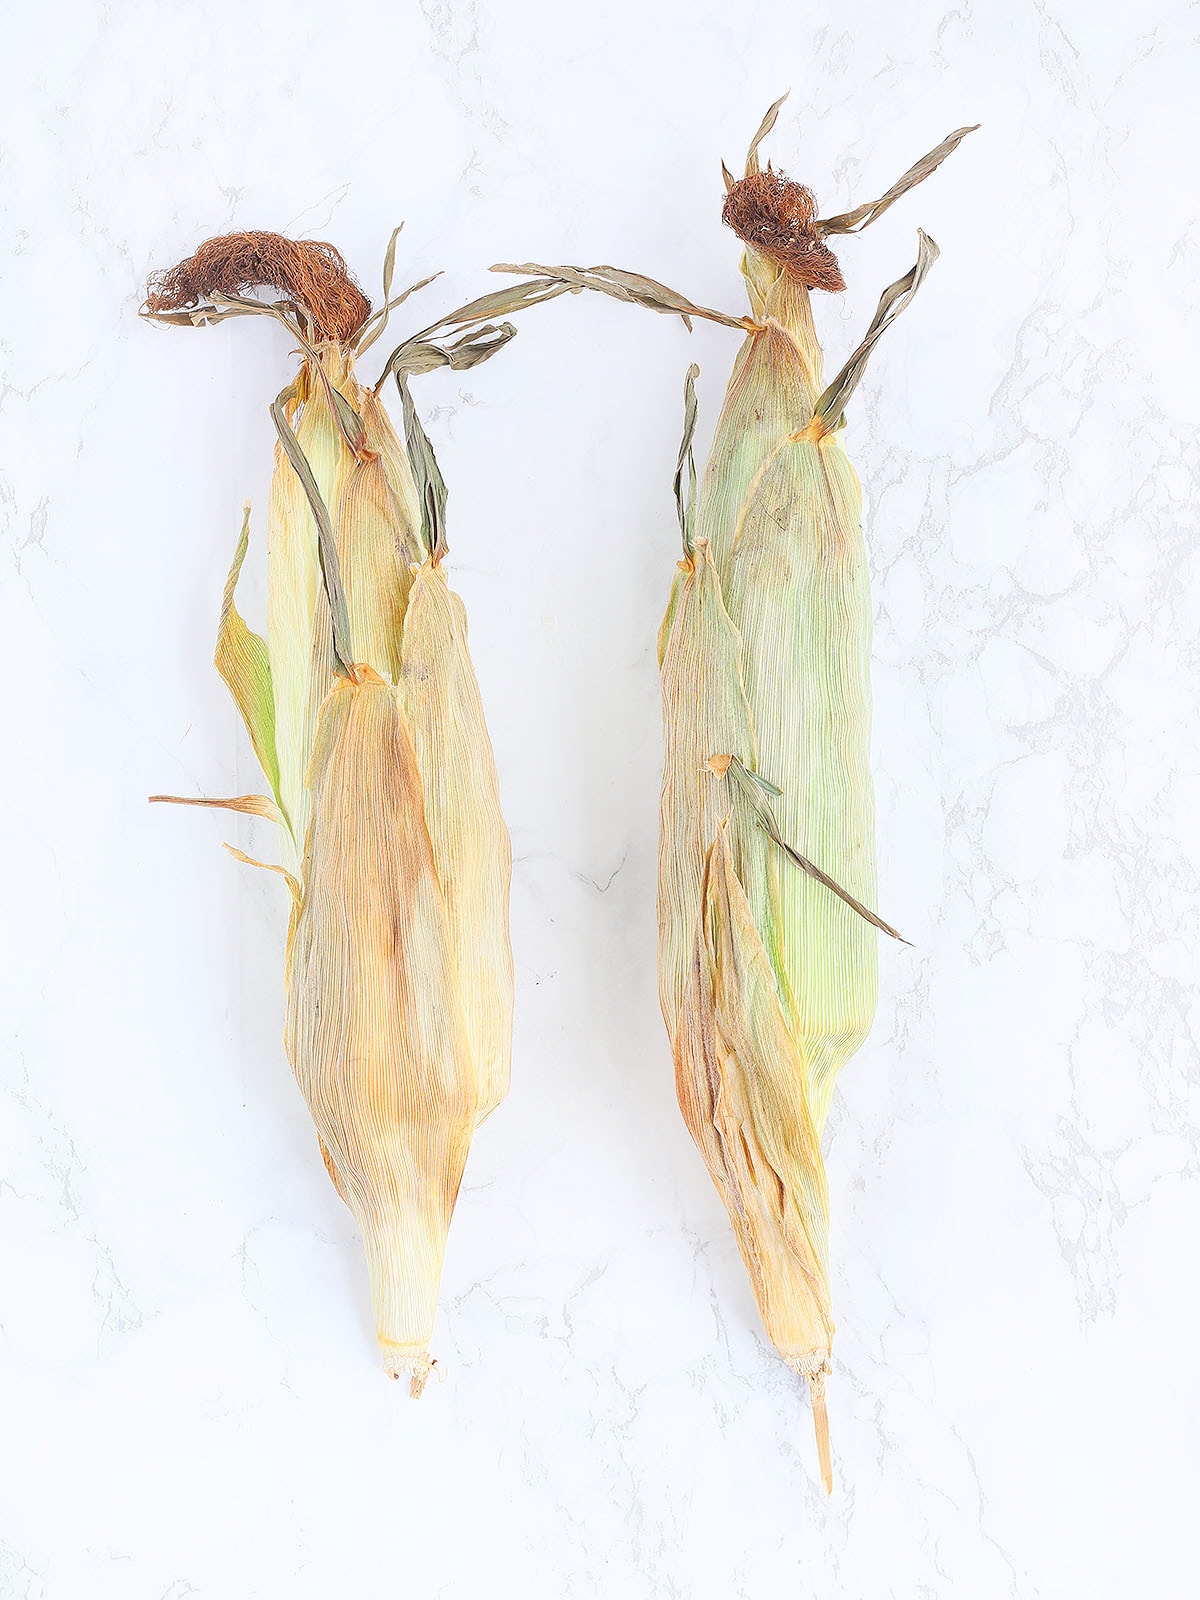 two ears of corn after they have been roasted in the oven